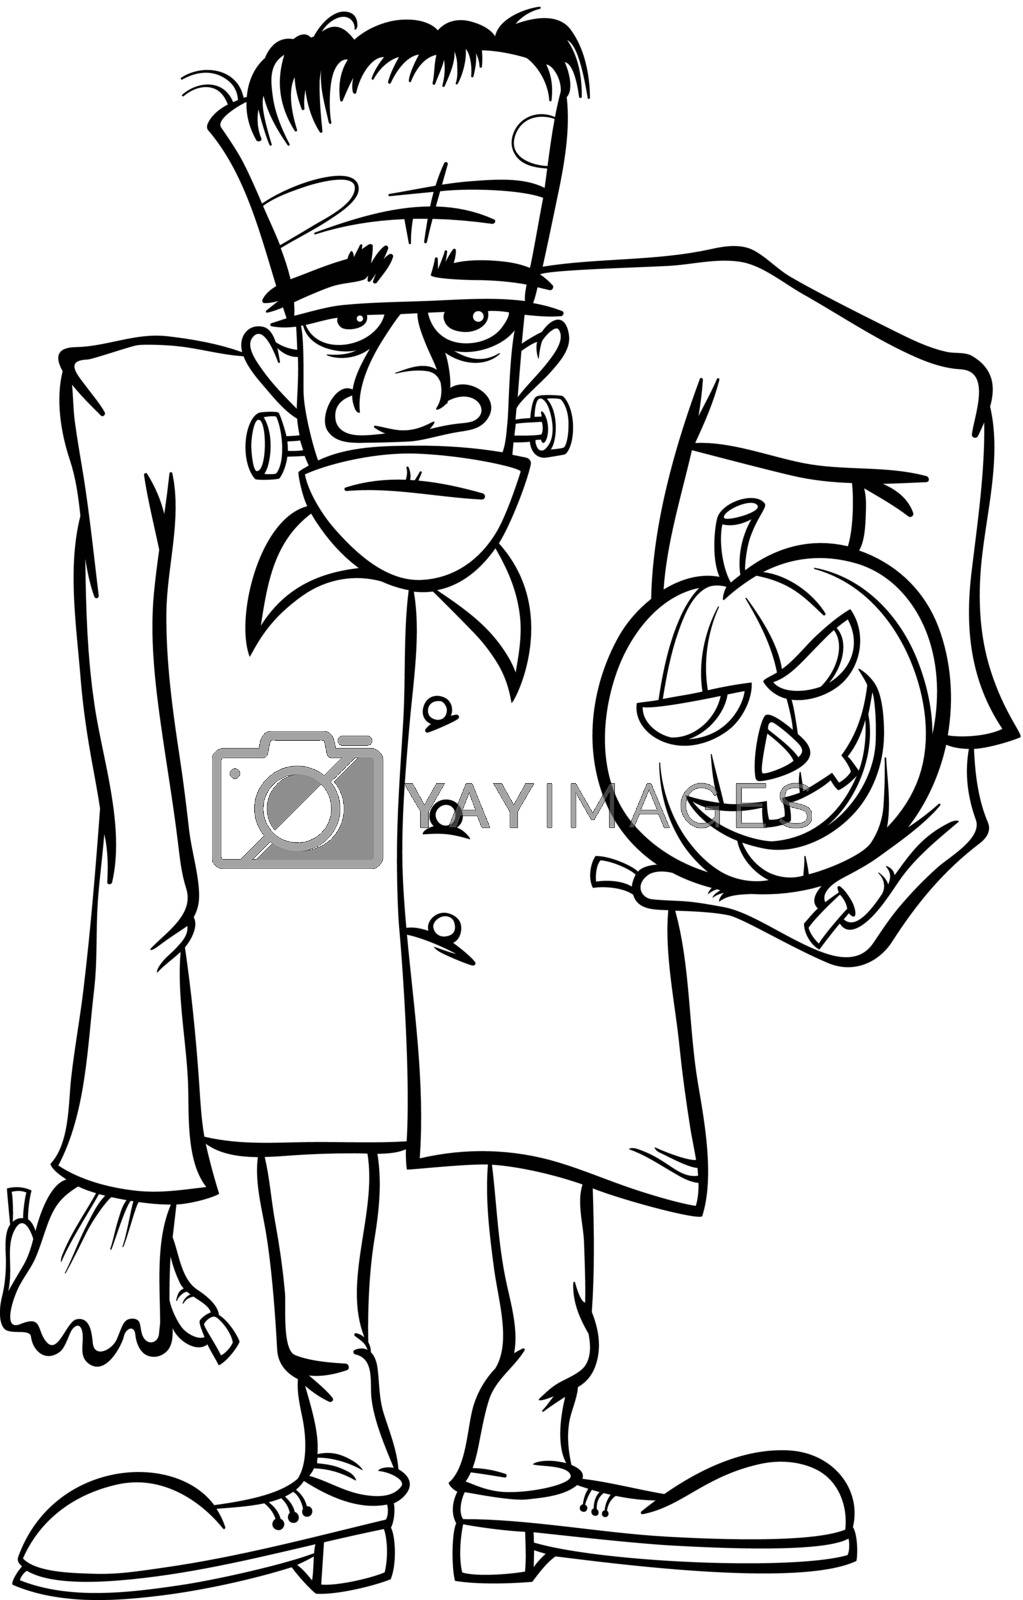 Royalty free image of frankenstein cartoon for coloring book by izakowski